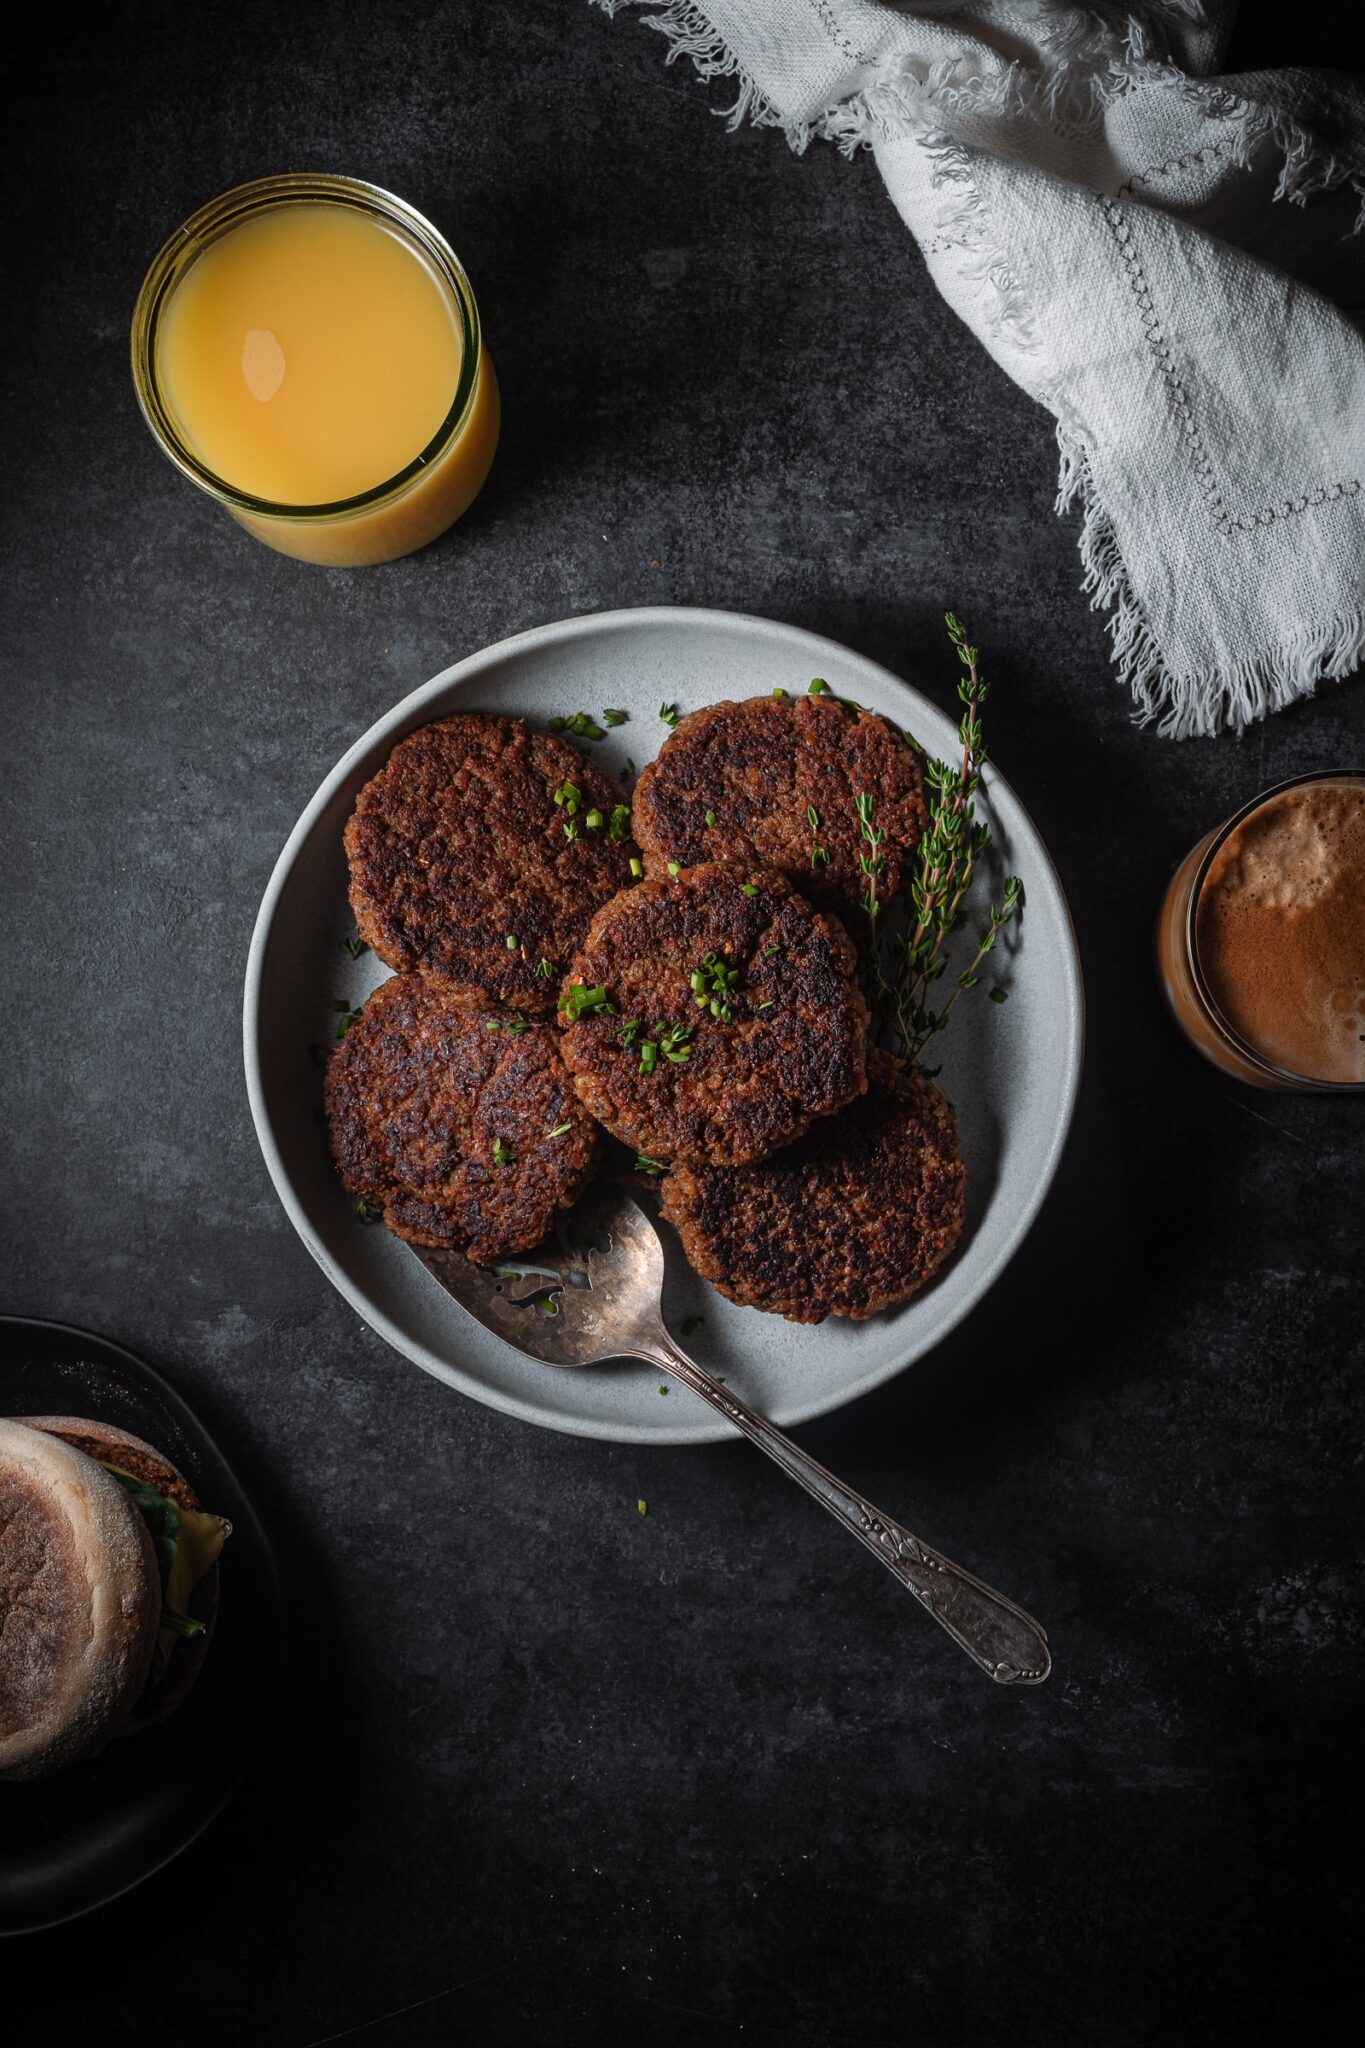 Vegan breakfast sausages on a plate with a serving spatula. Served with orange juice and coffee.